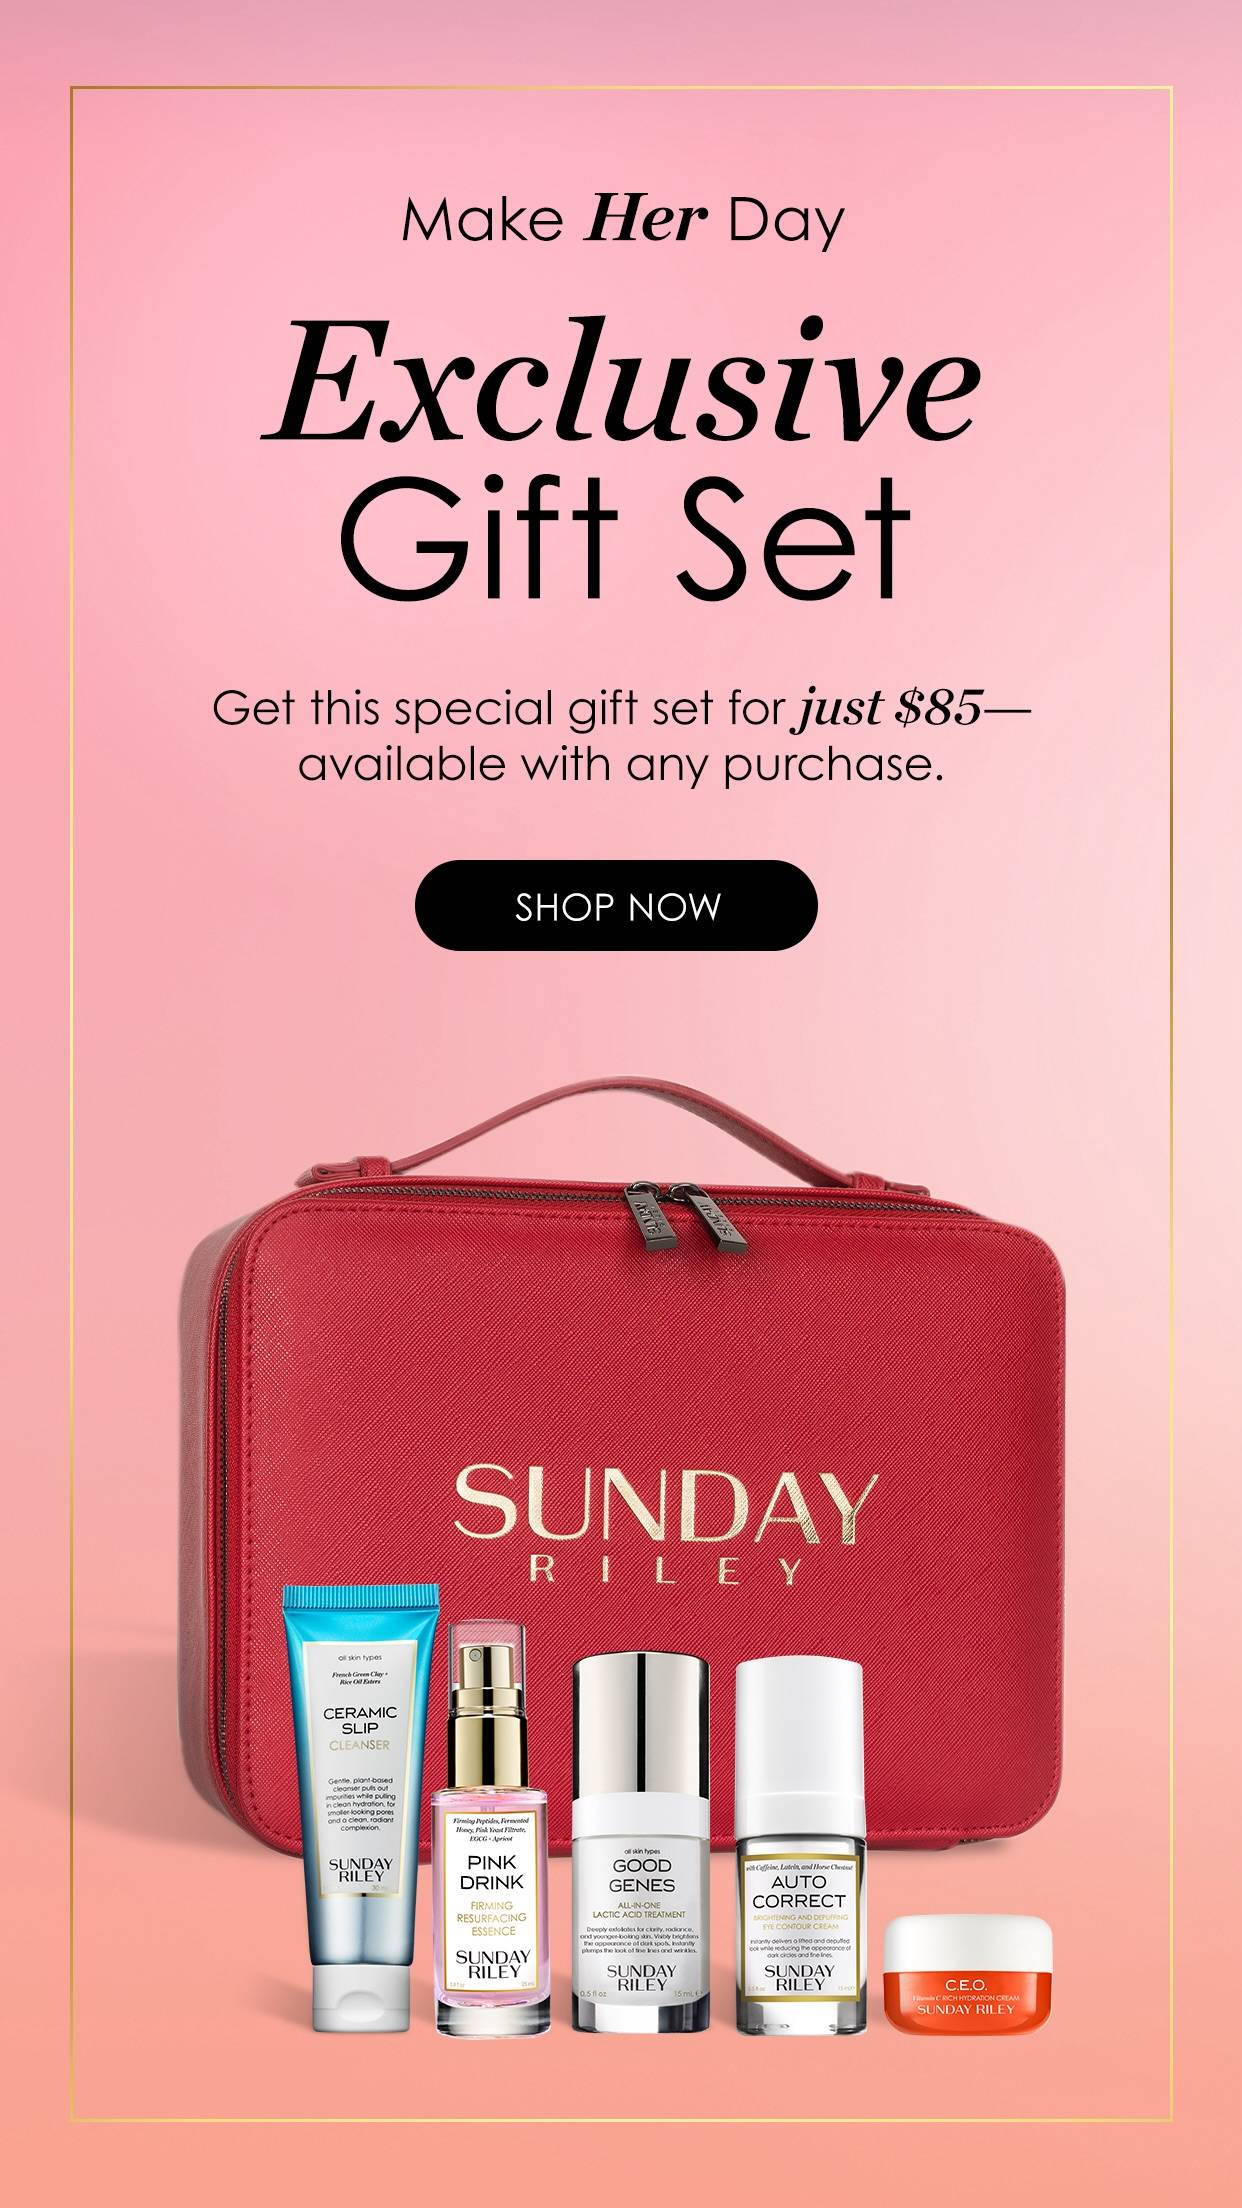 Make her day - exclusive gift set - get this special gift set for JUST $85 available with any purchase